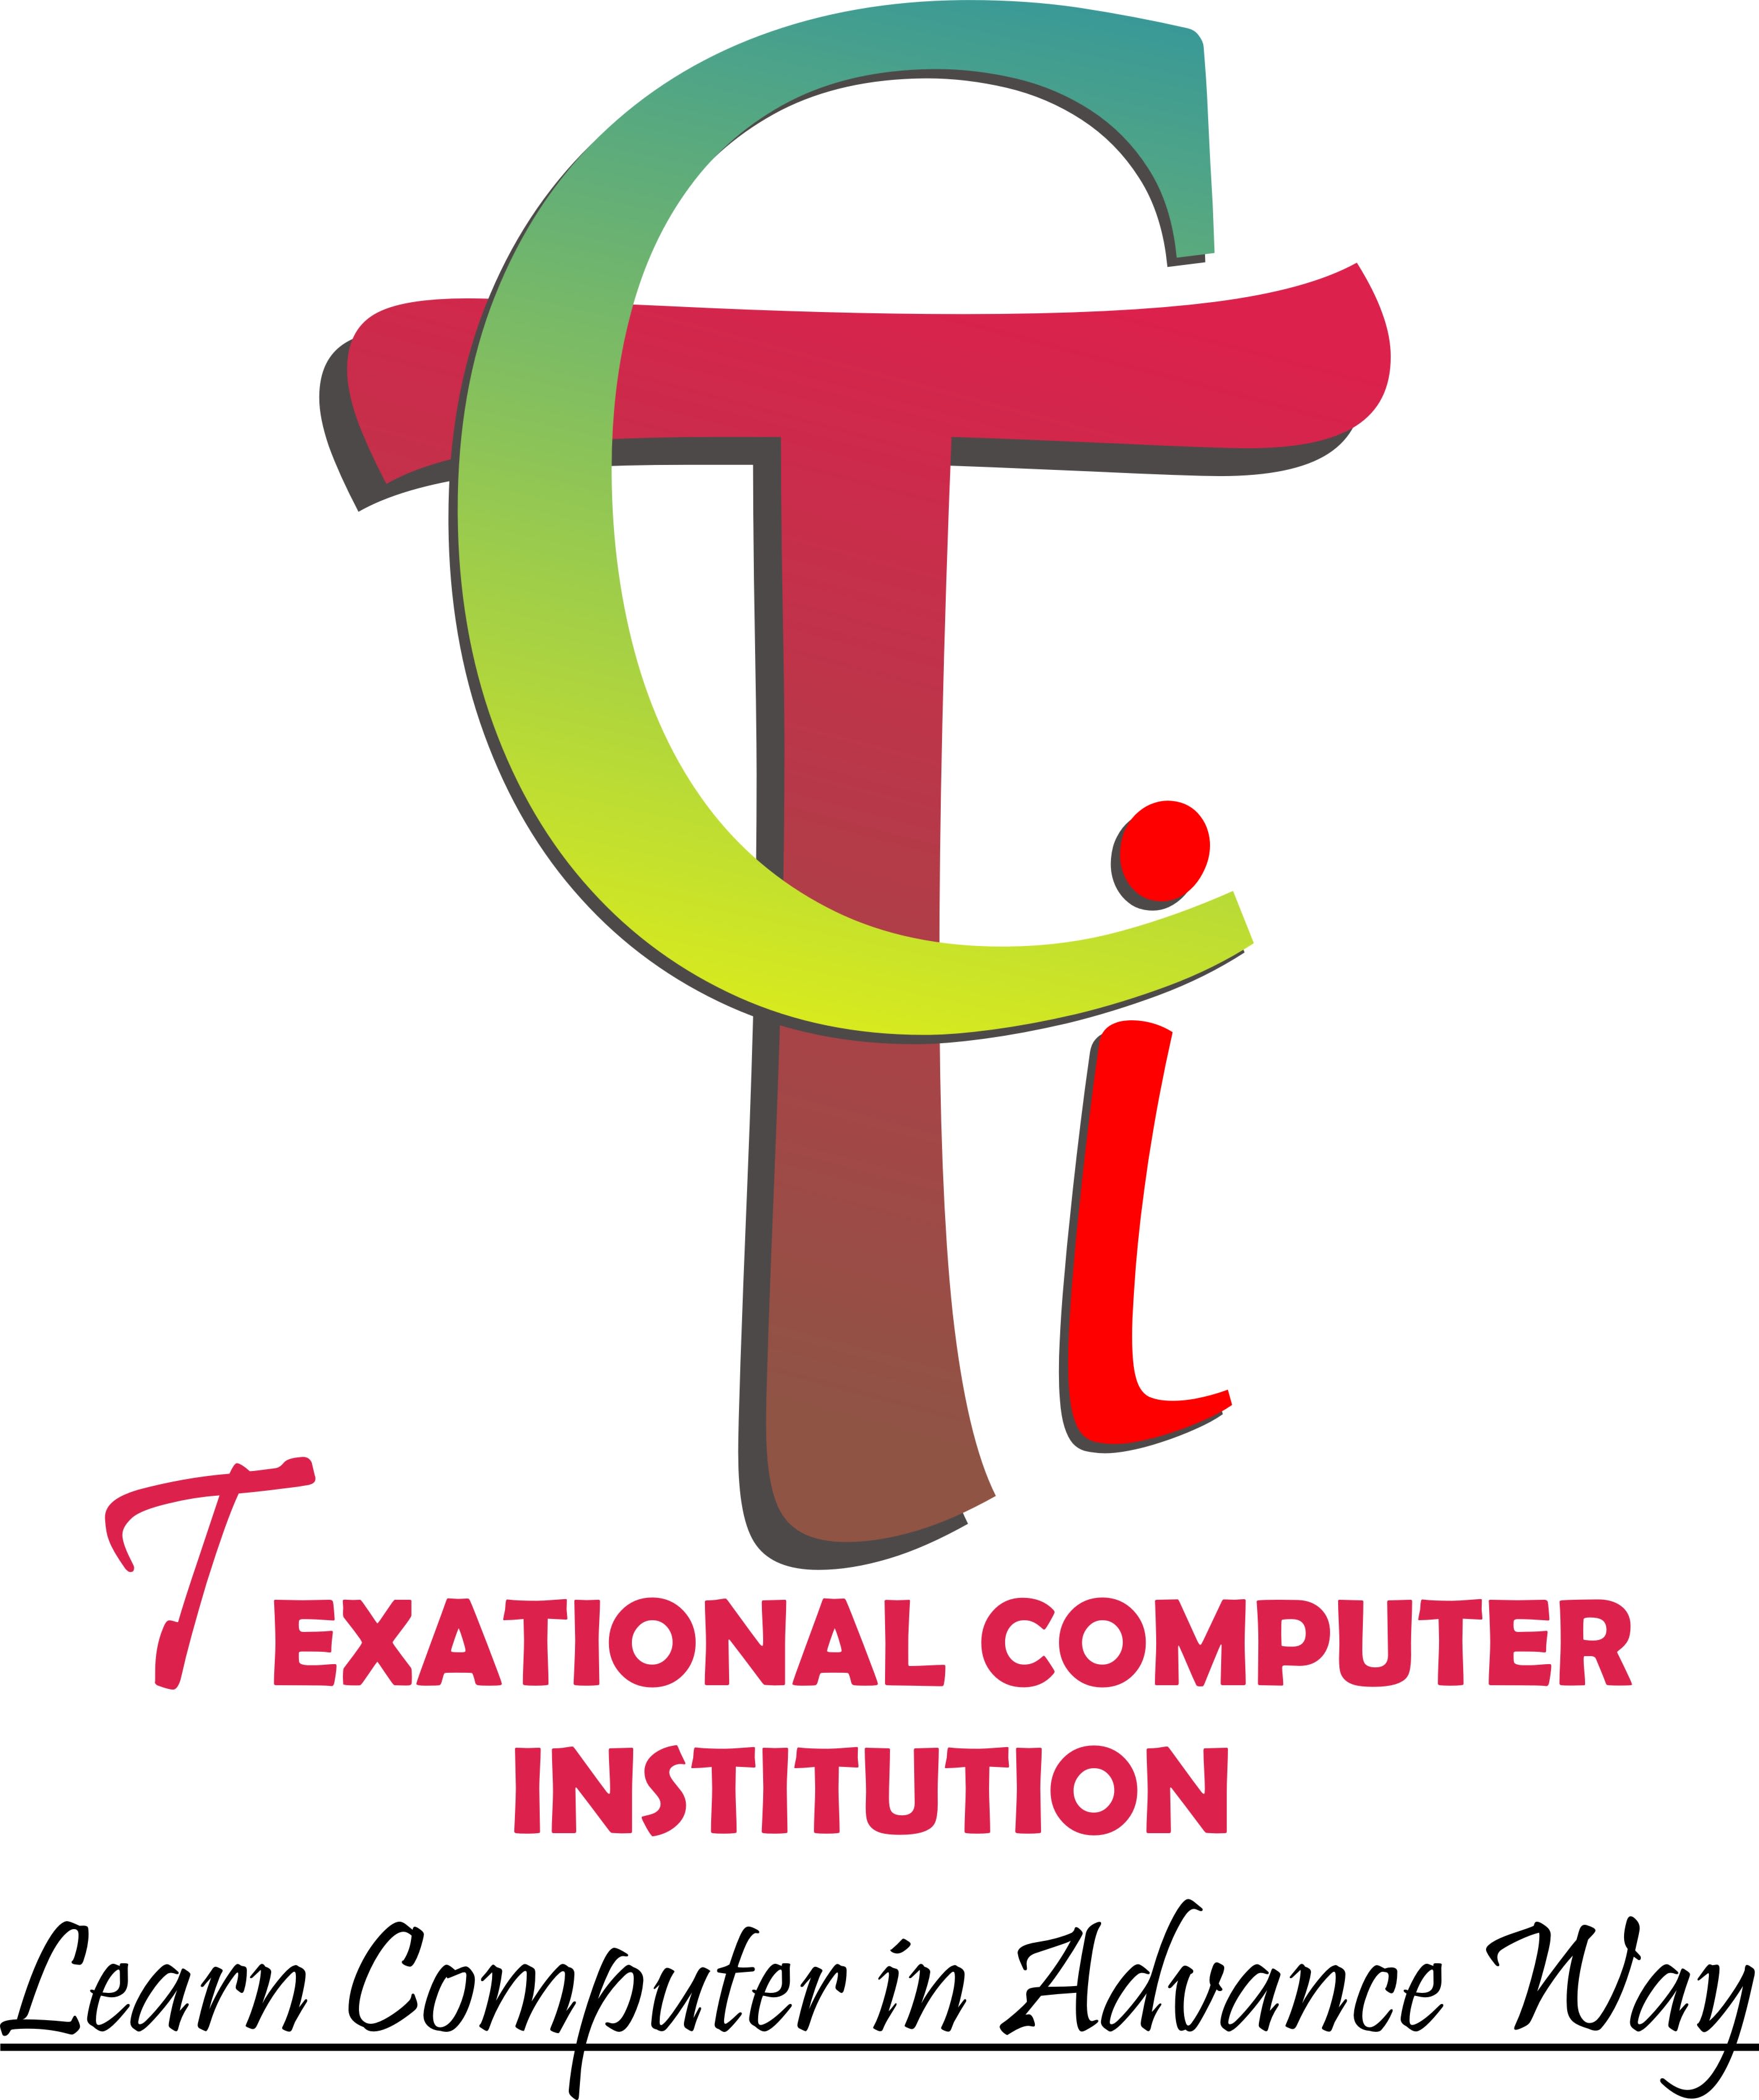 Texational Computer Institution